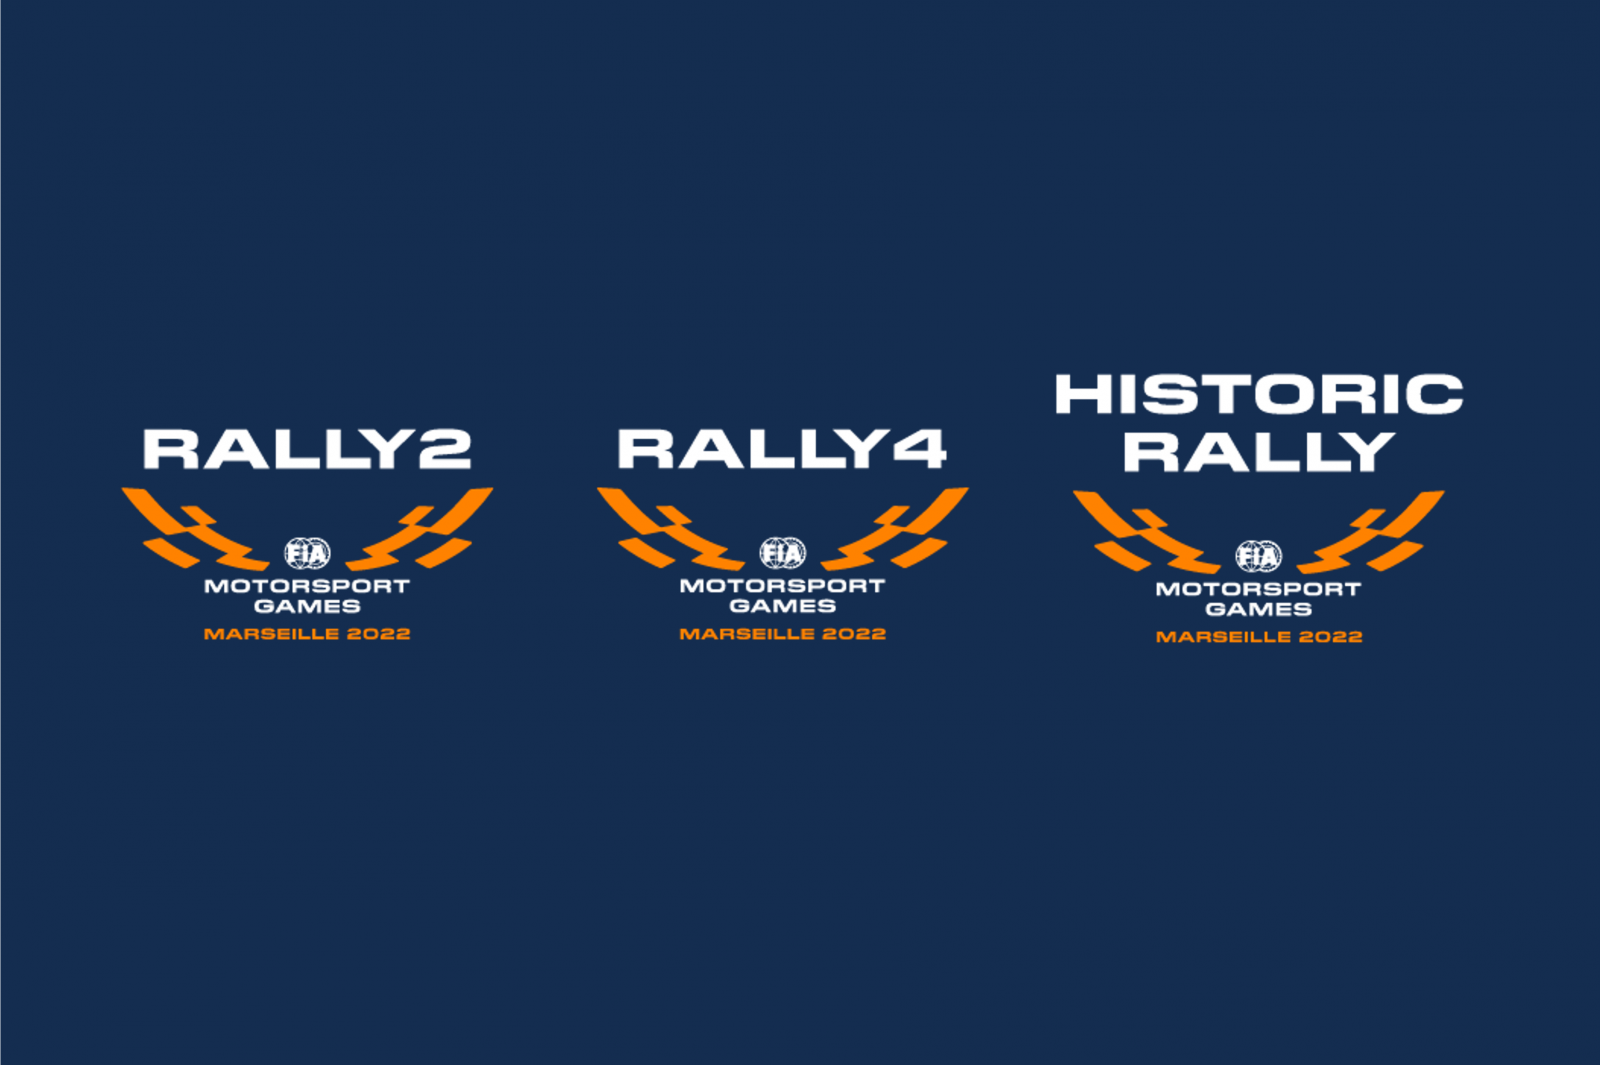 FIA Motorsport Games Preview: Rally2, Rally4 & Historic Rally